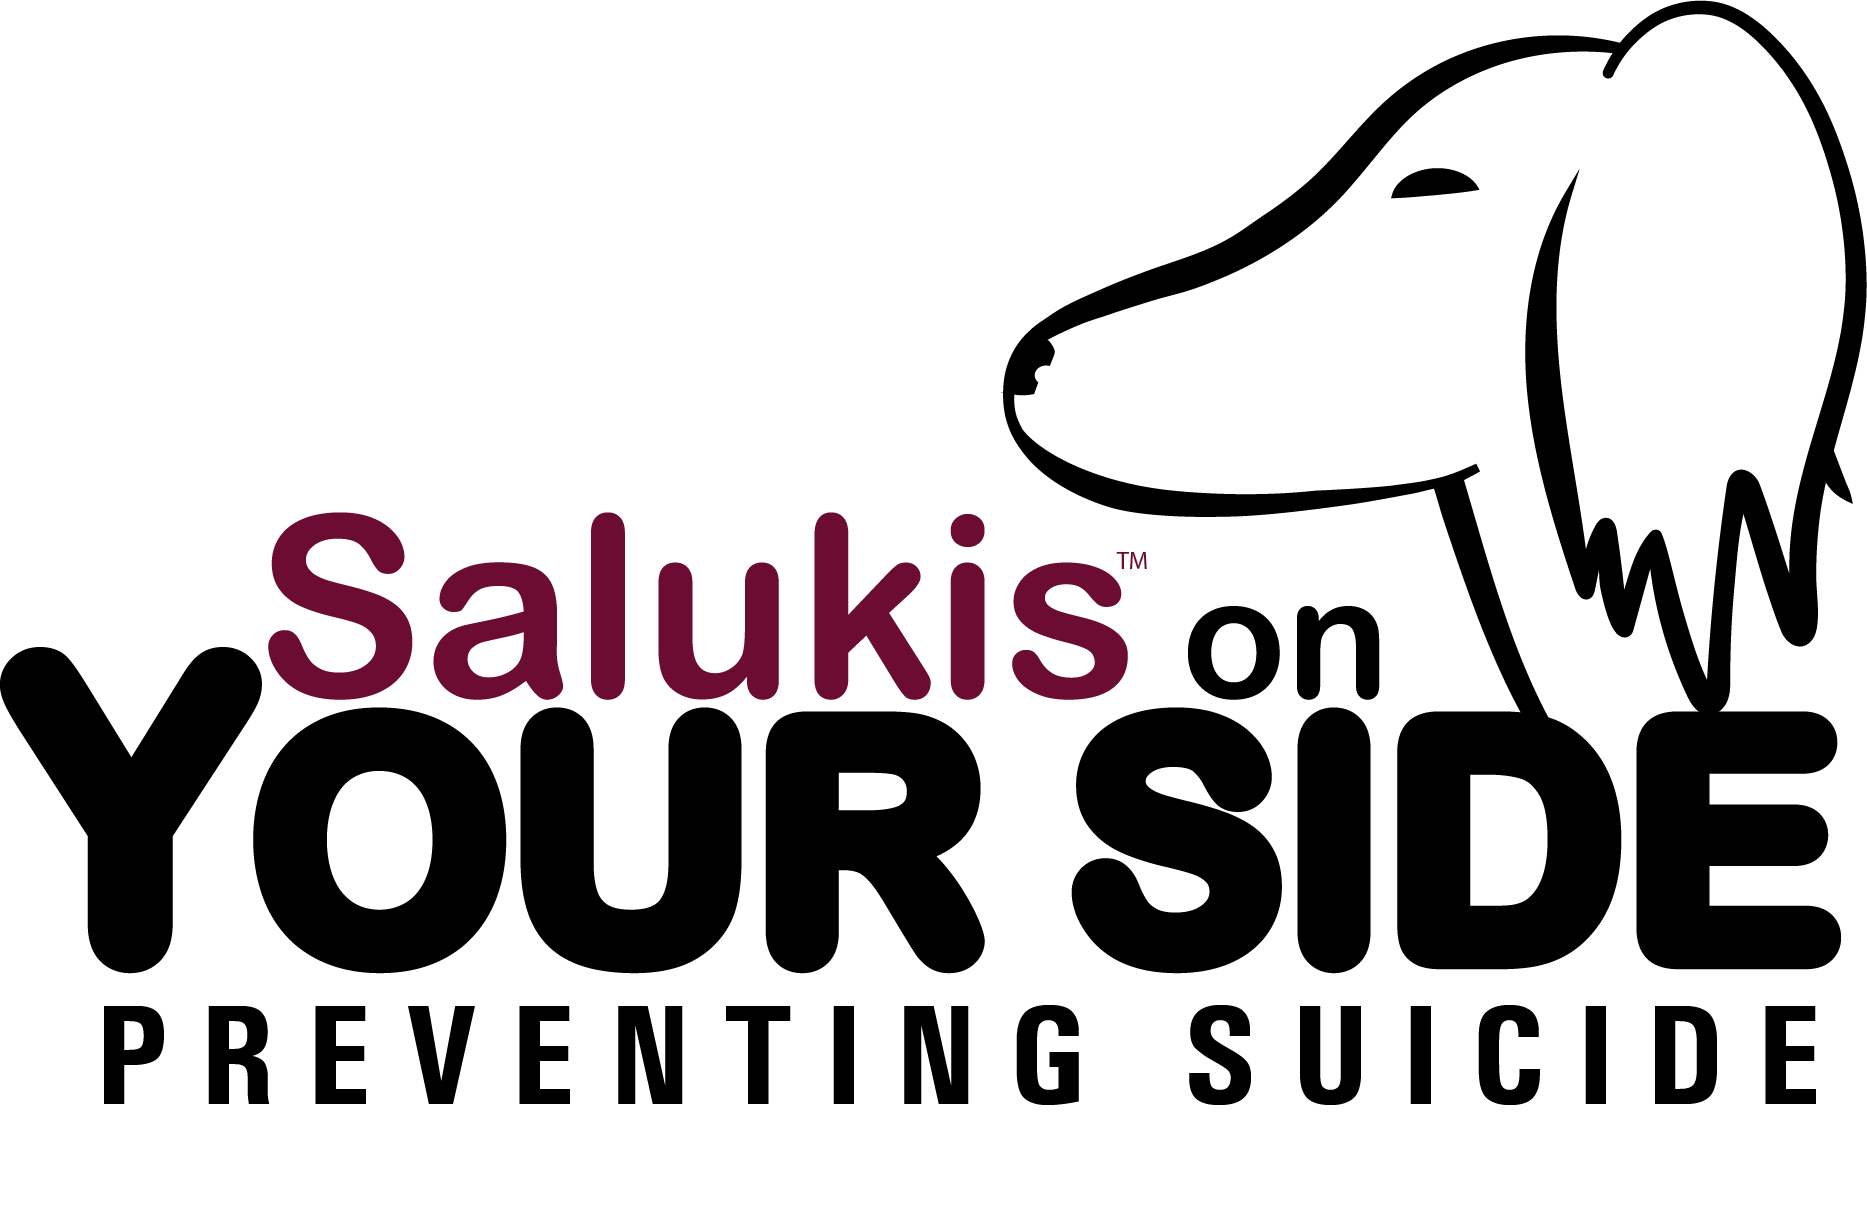 Salukis on Your Side